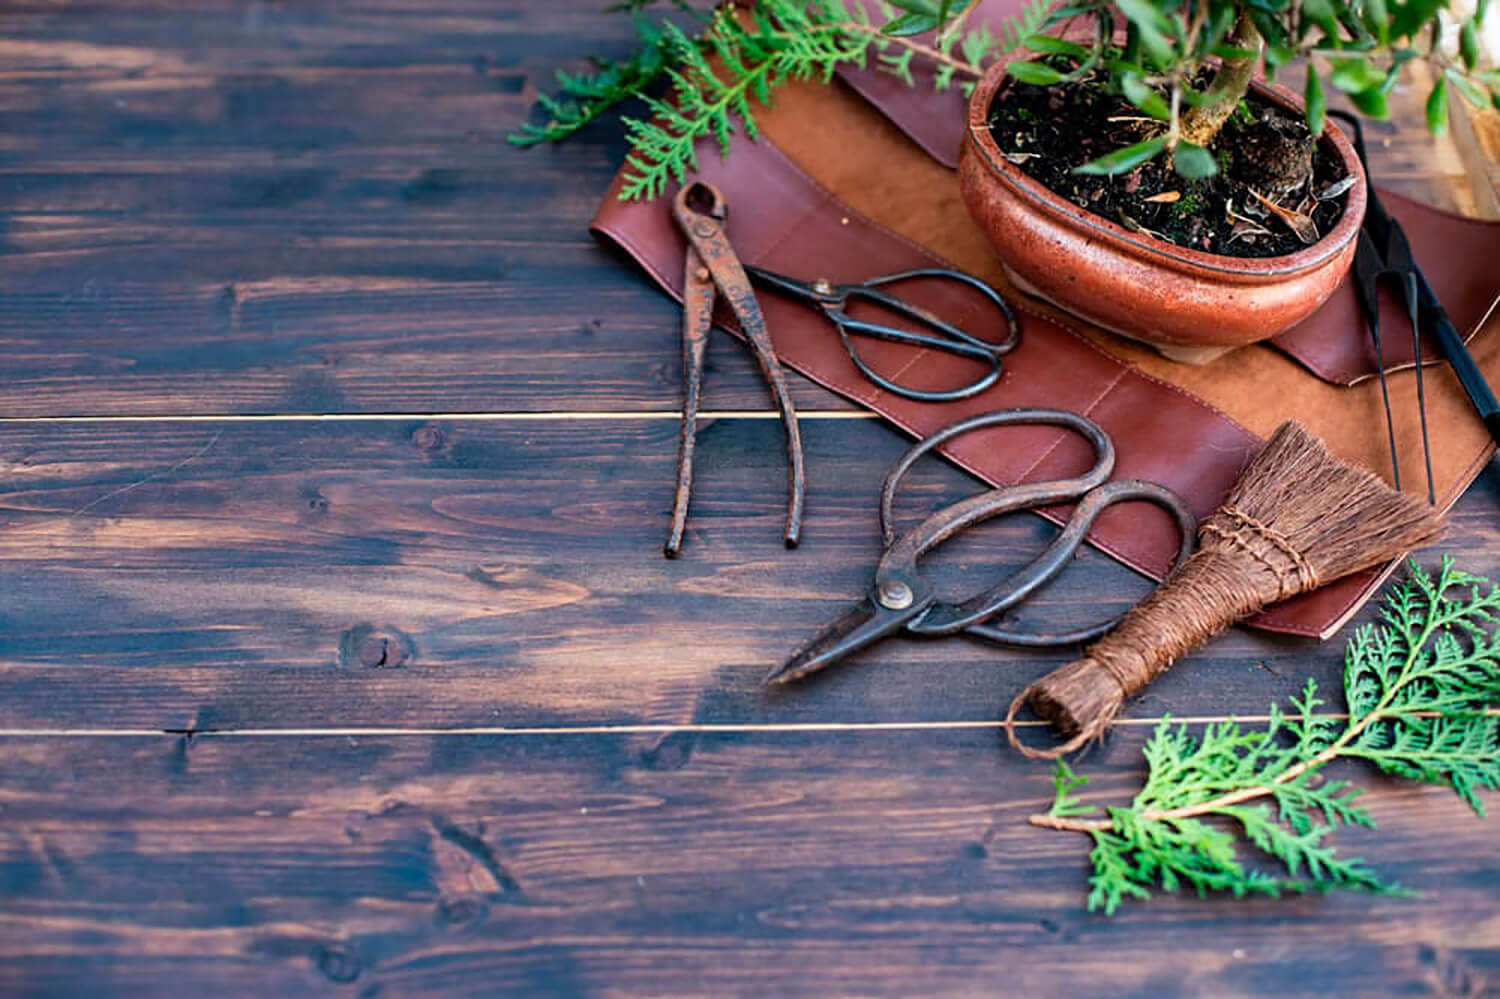 15 Essential Bonsai Tools and Their Uses - Hooked on Bonsai